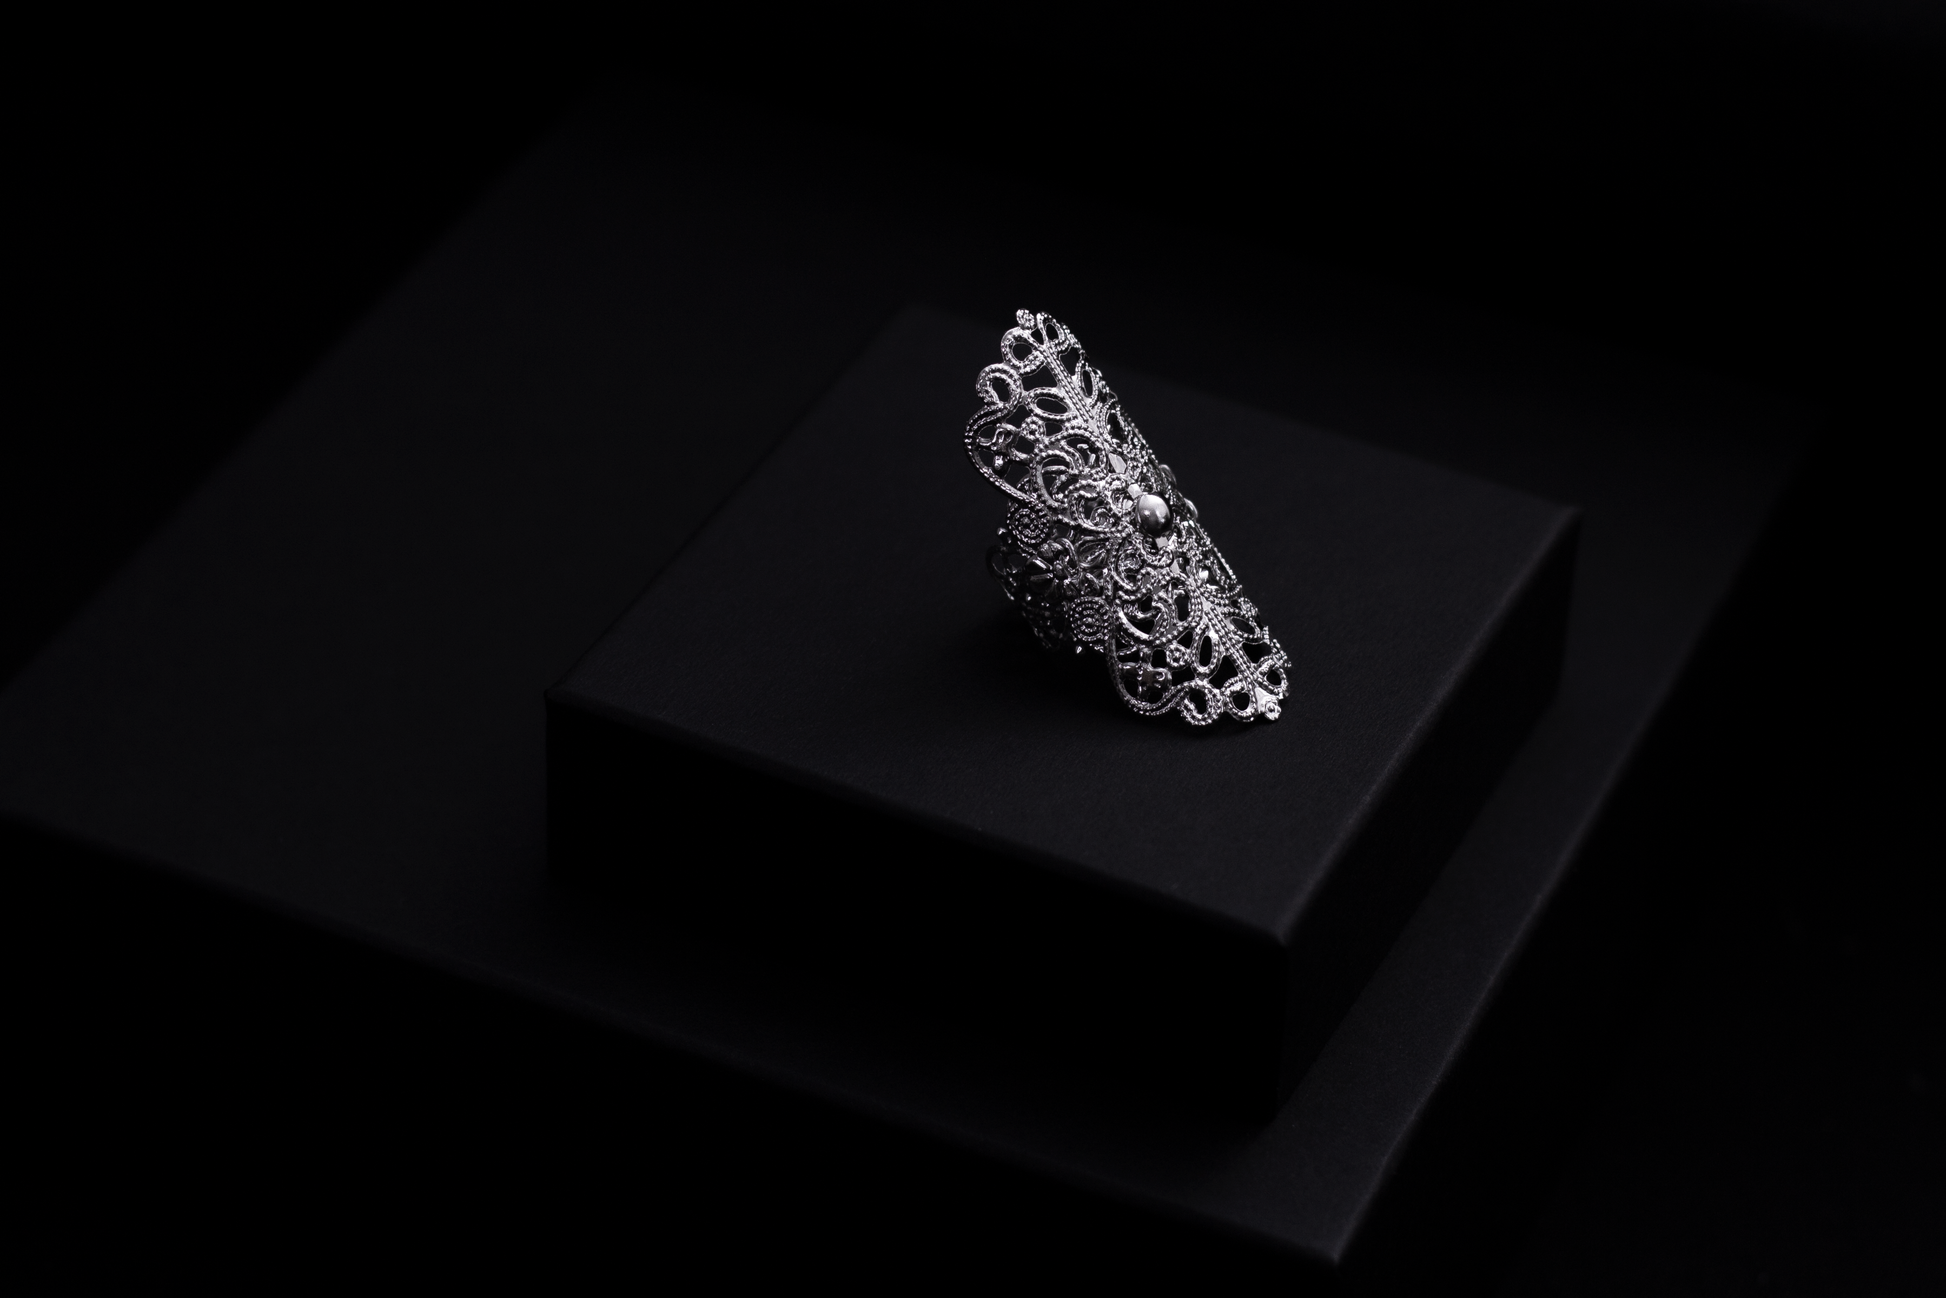 Elegant oval gothic ring by Myril Jewels, showcasing intricate filigree detail. This statement piece fuses witchcore charm with neo-gothic sophistication, making it an ideal accessory for minimal goth attire, festive occasions, or as a thoughtful goth girlfriend gift.